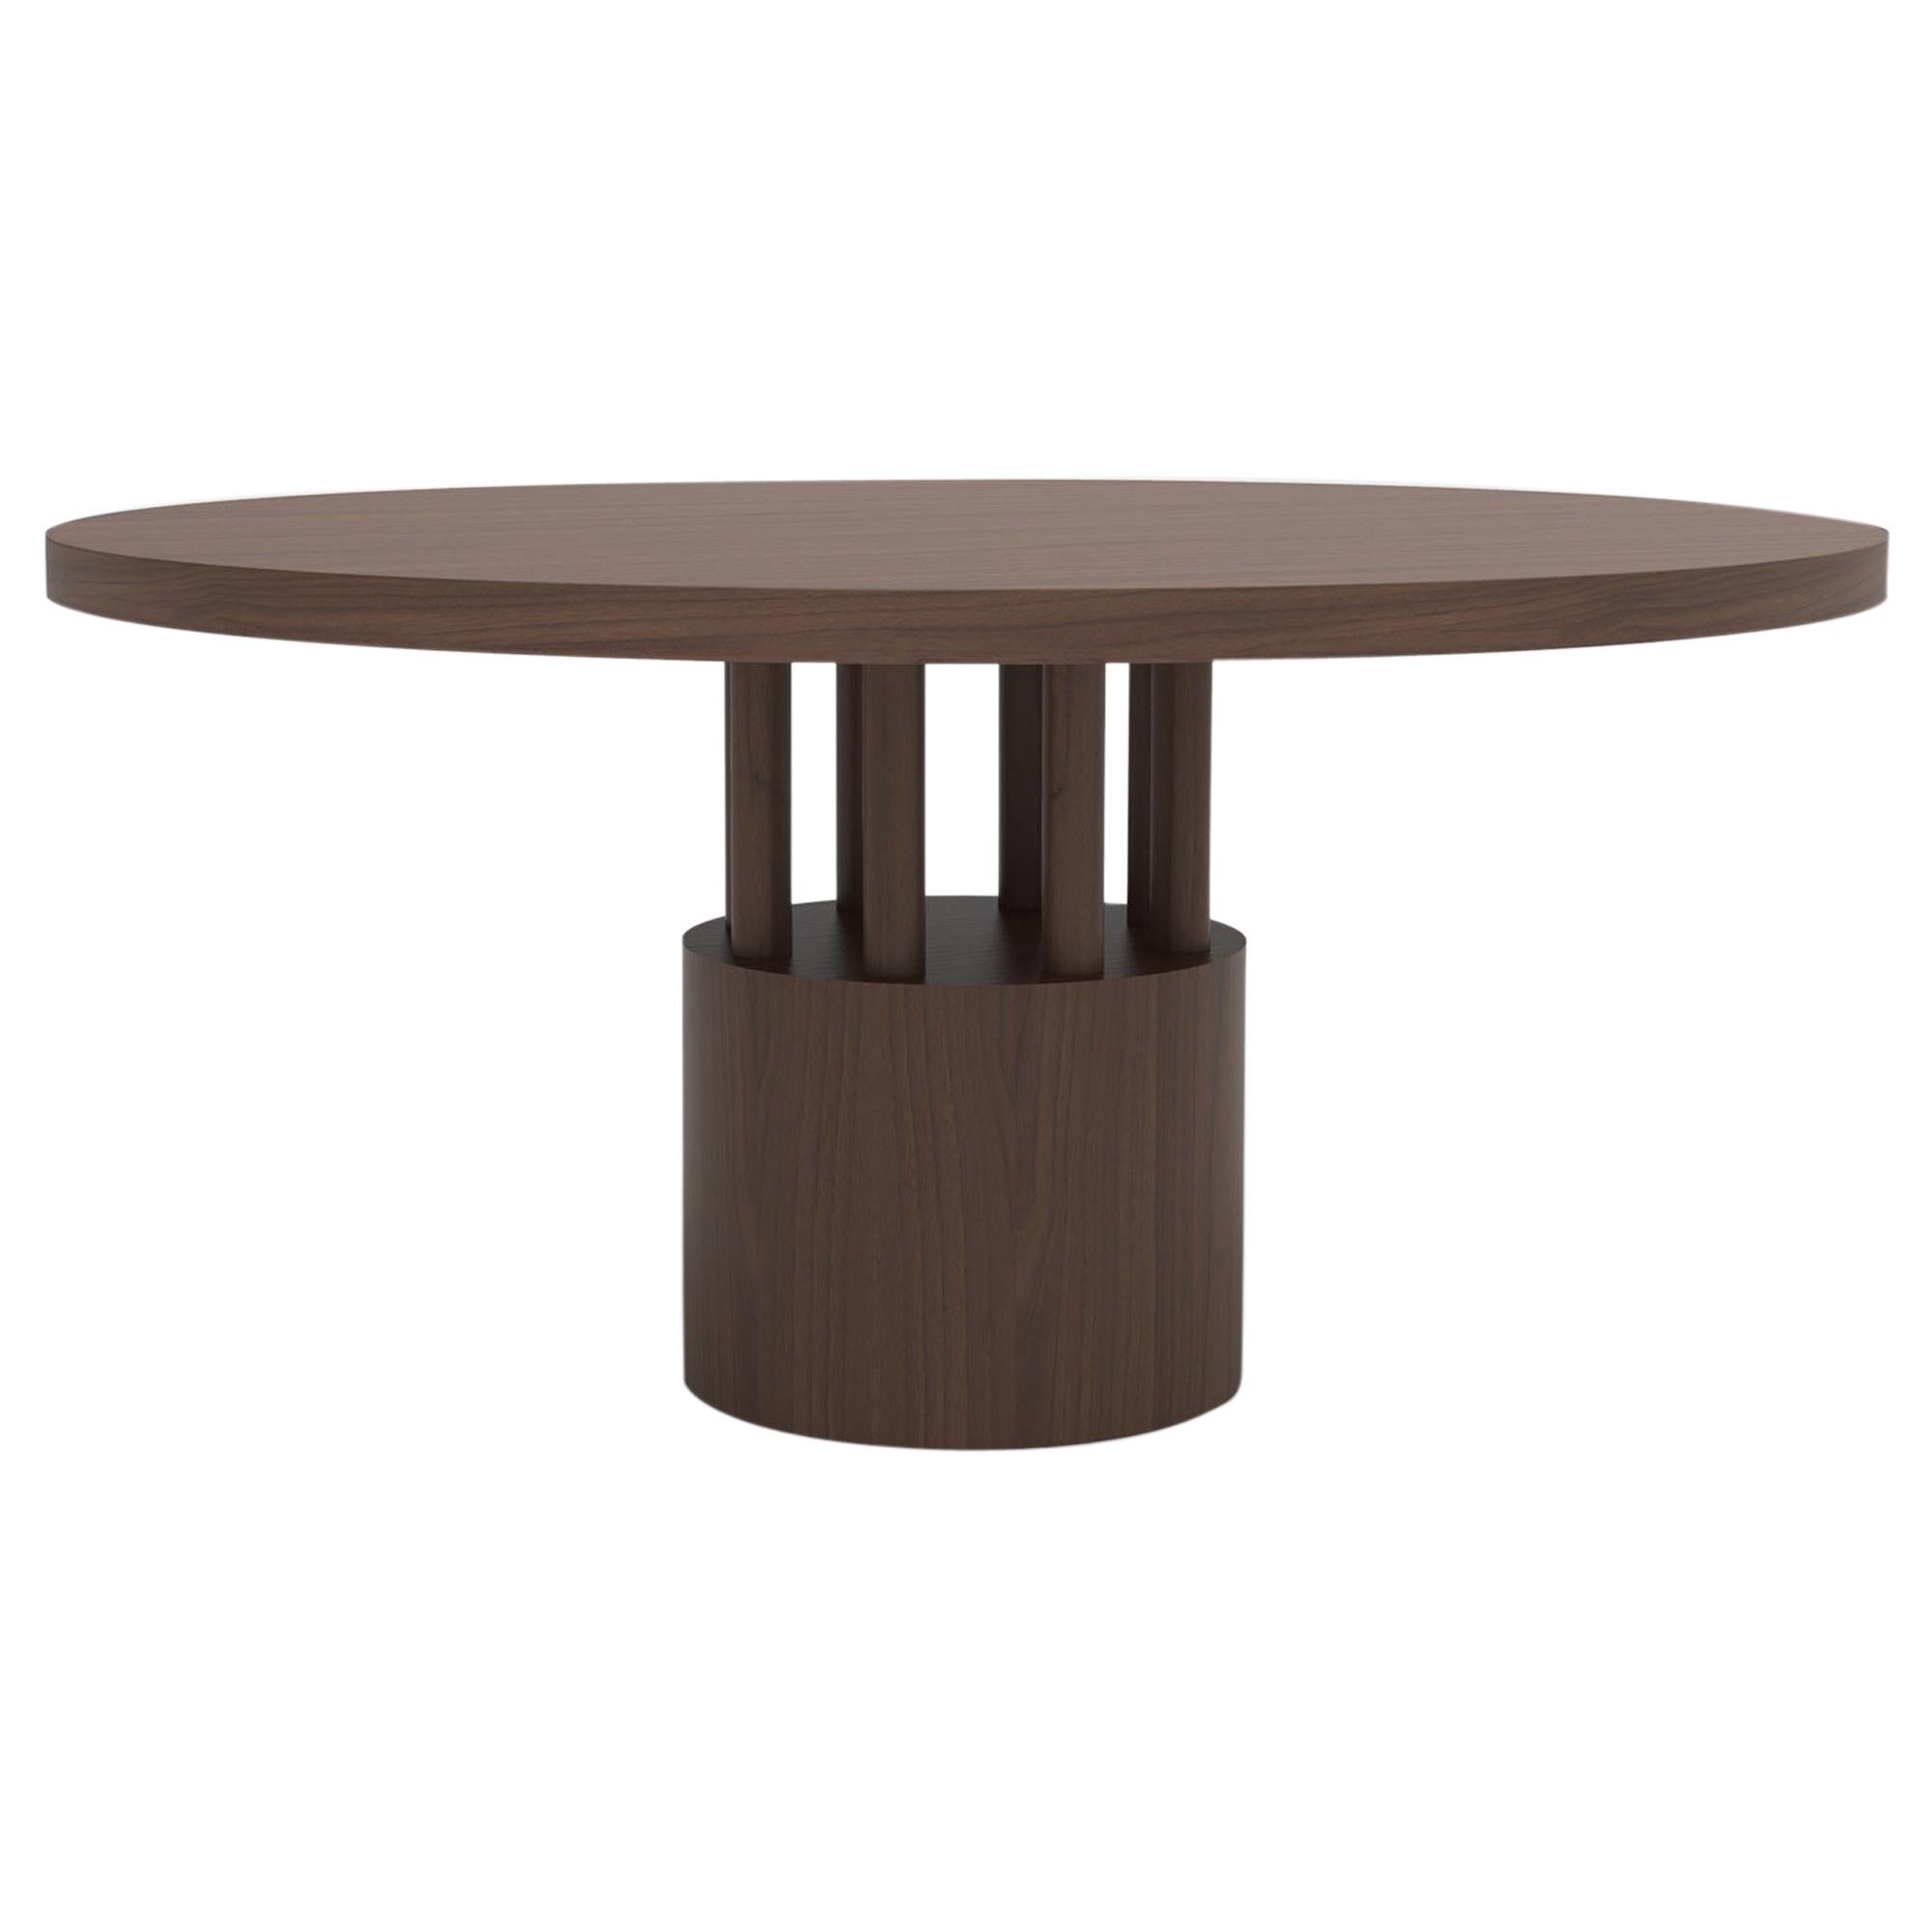 Walnut Wood Dining Table with Round Wood Base and Posts